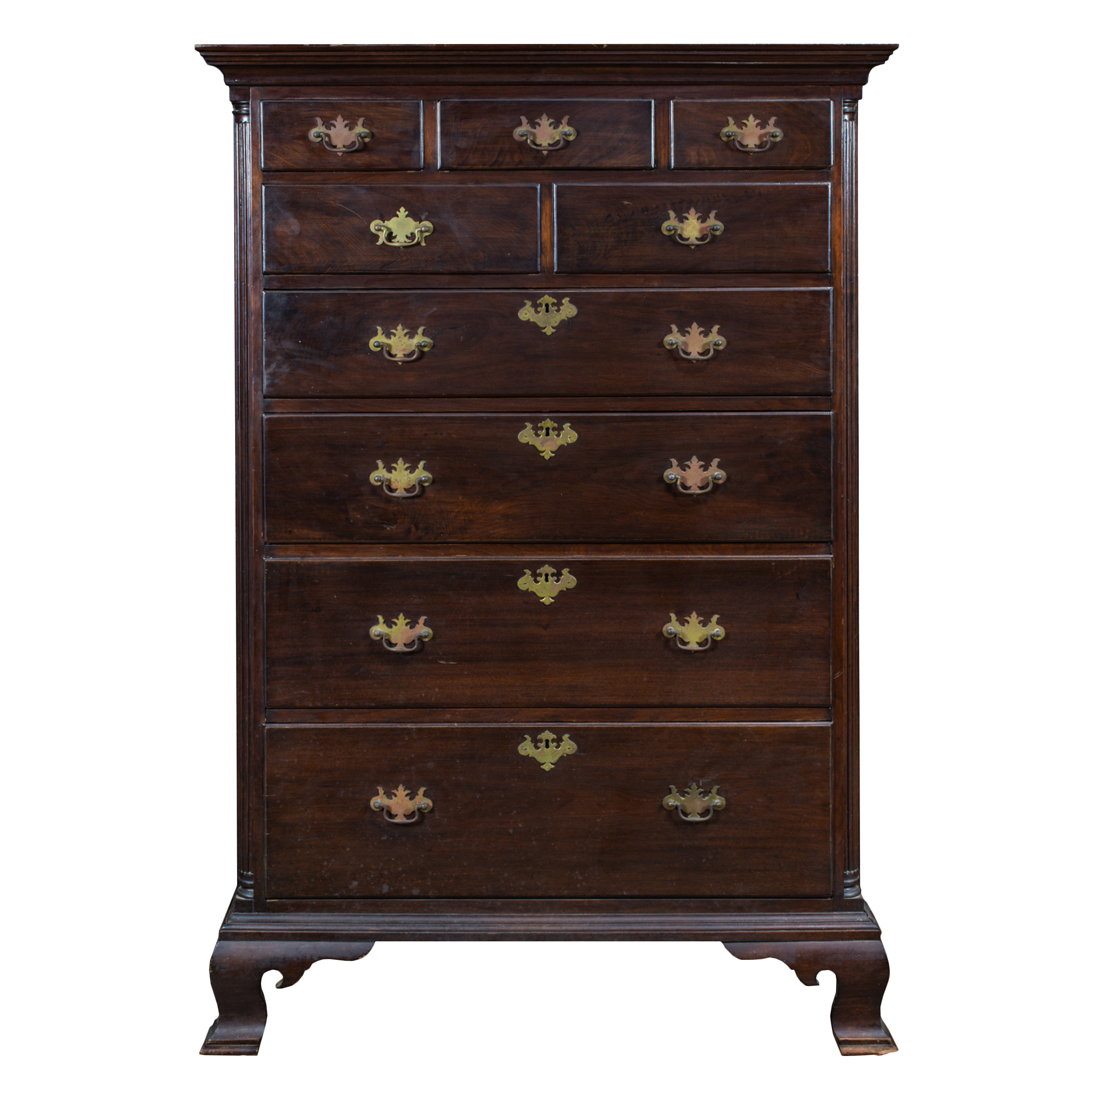 CHIPPENDALE MAHOGANY HIGH BOY A